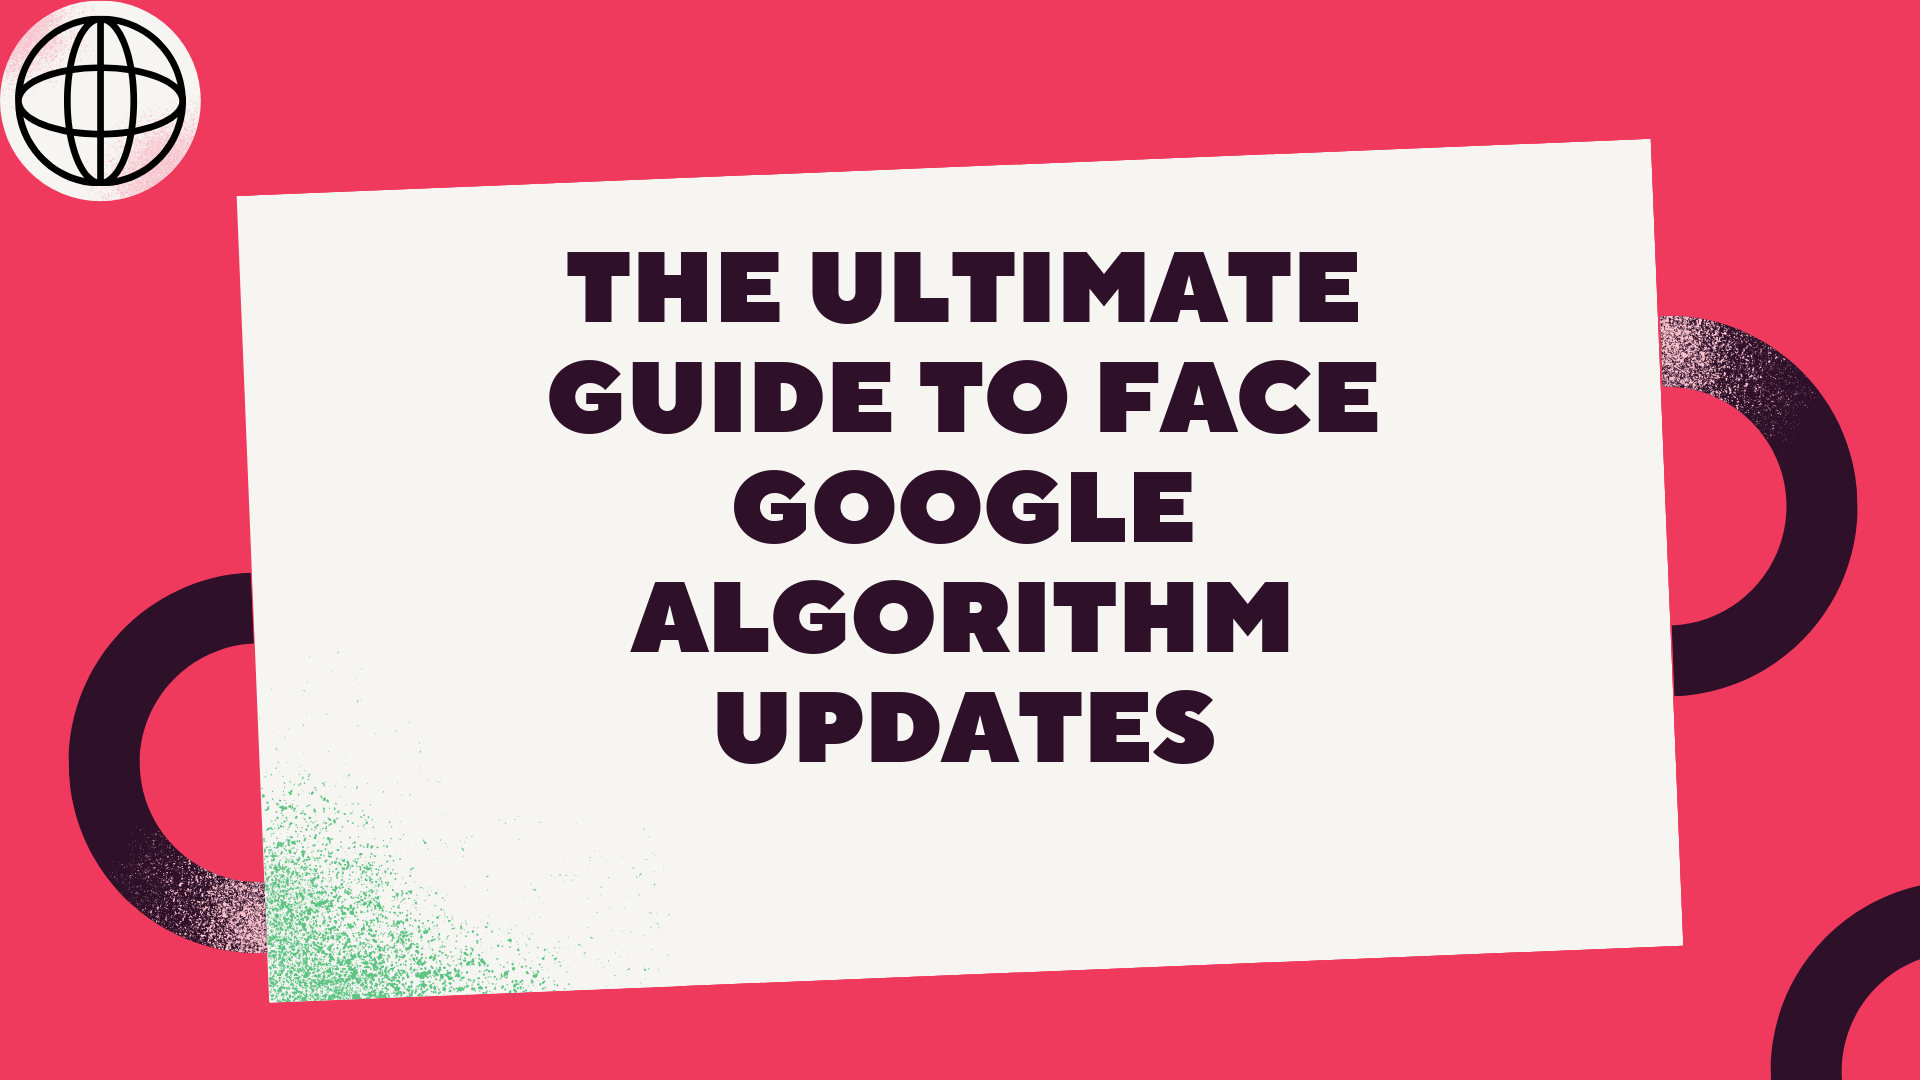 The Ultimate Guide to face Google Algorithm Updates